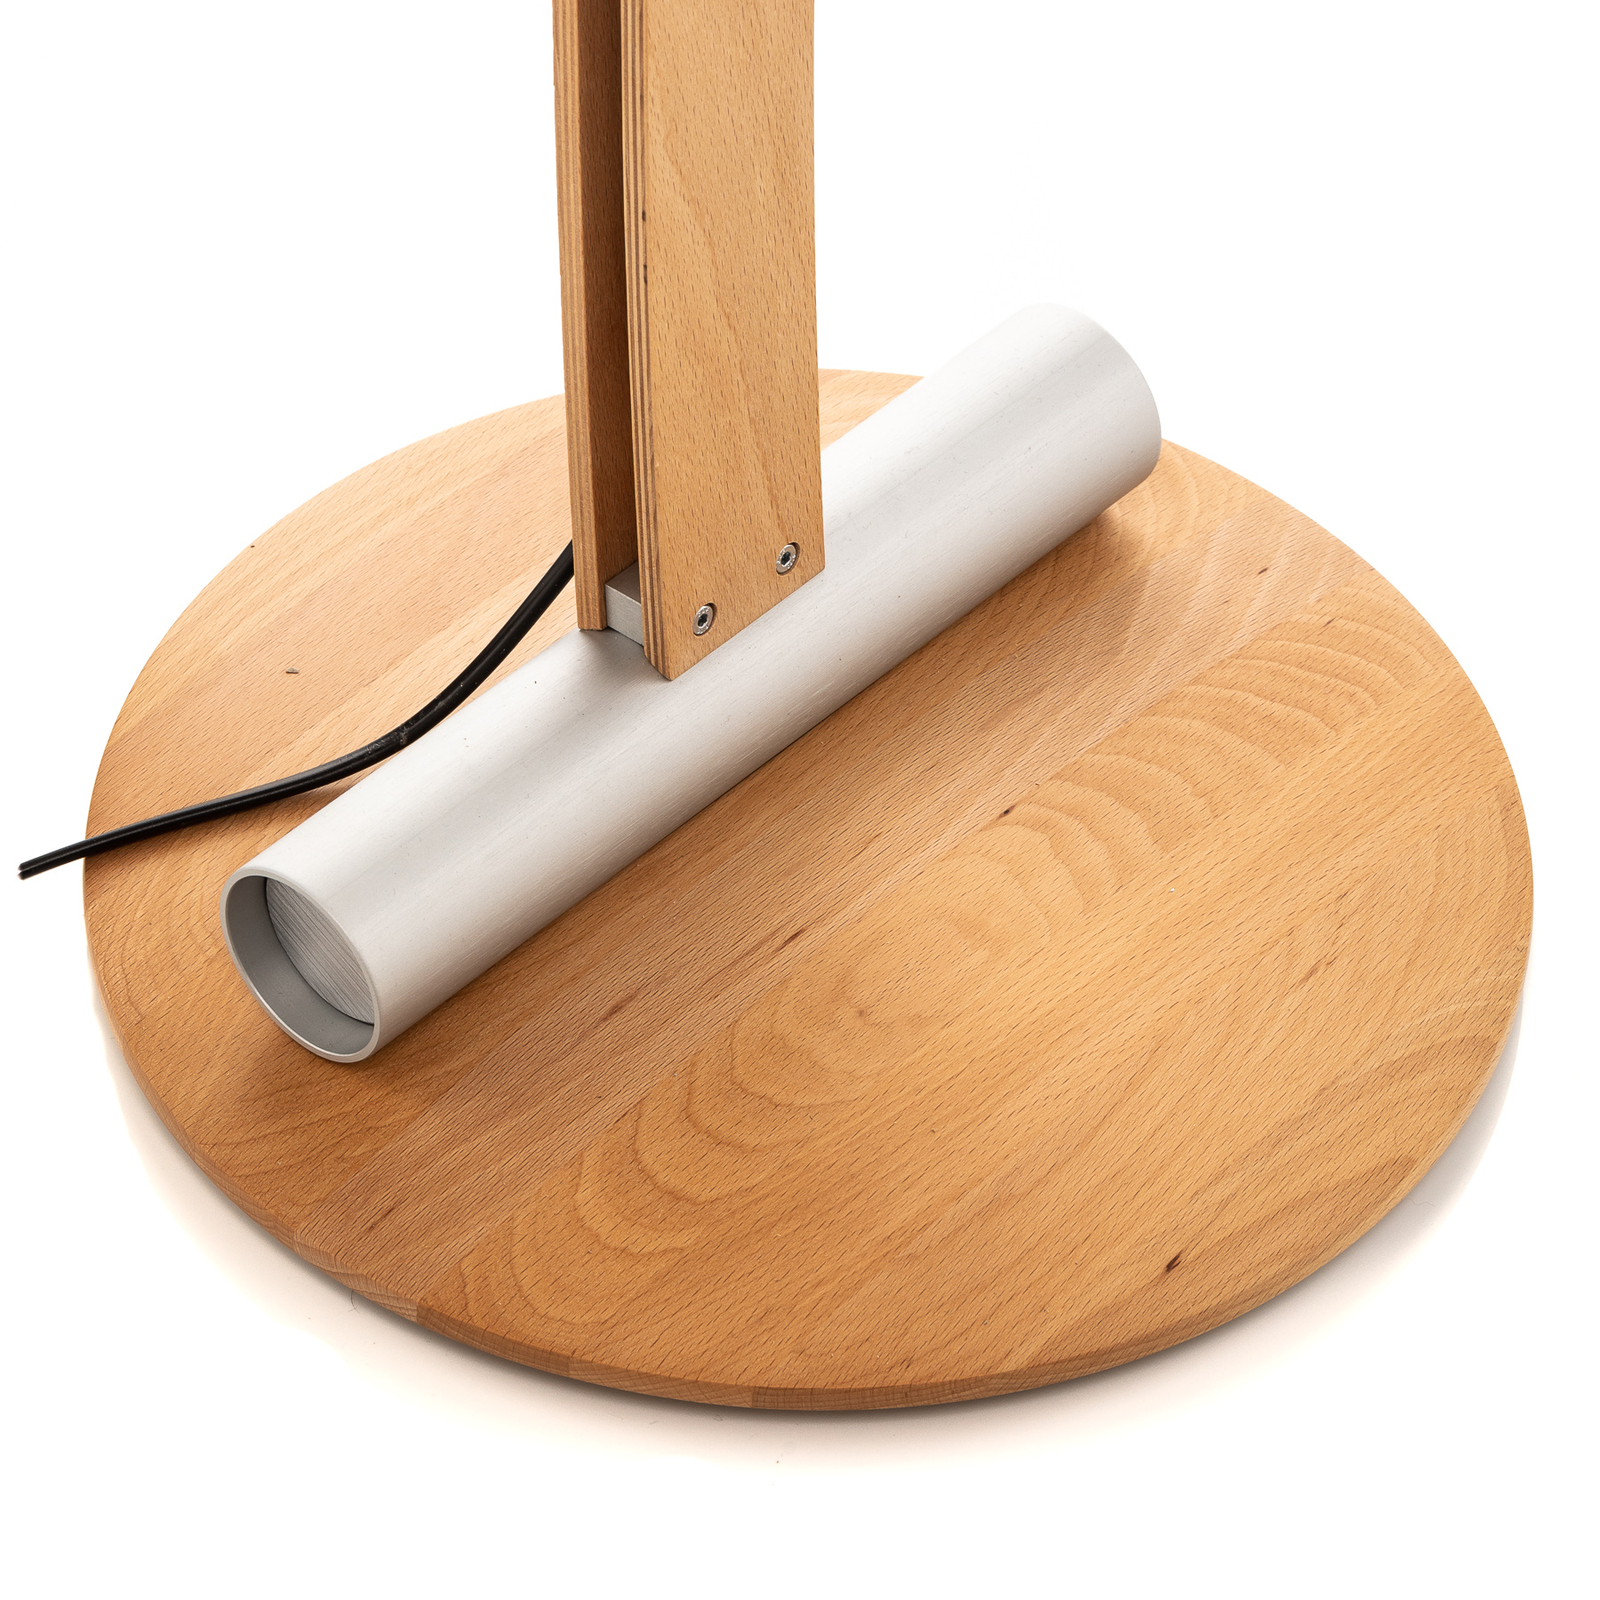 Bolino floor lamp with a dimmer